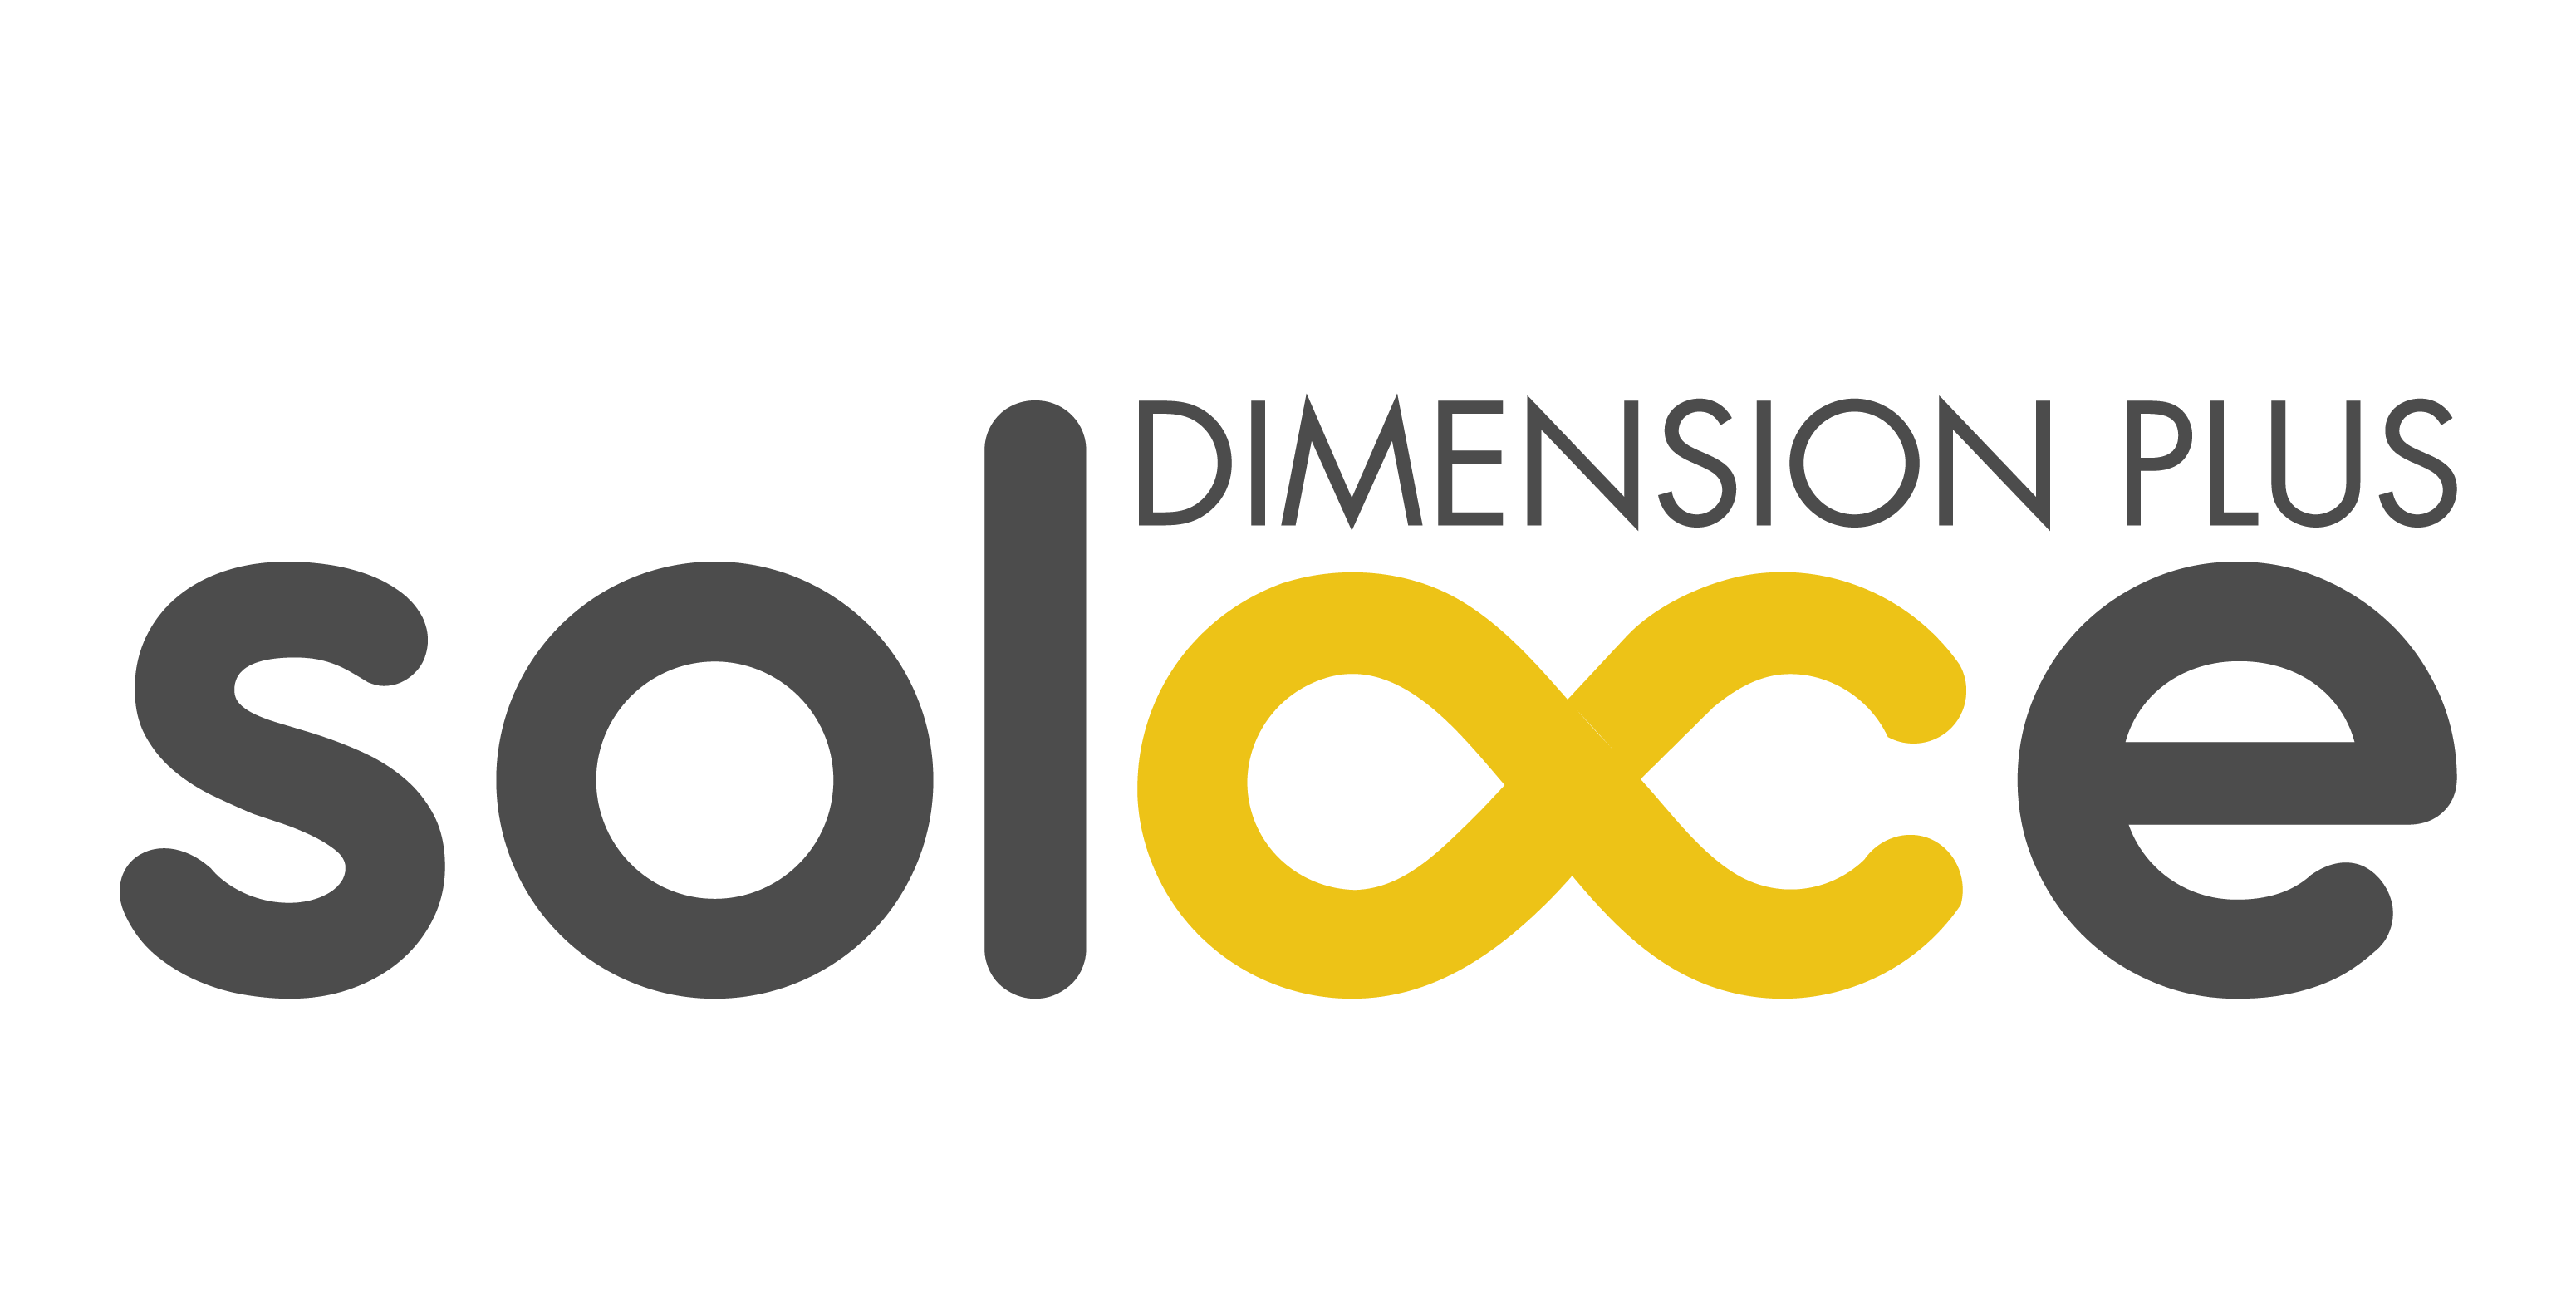 DIMENSION PLUS Solace is special BIM service package to support architects and interior designers on their journey.